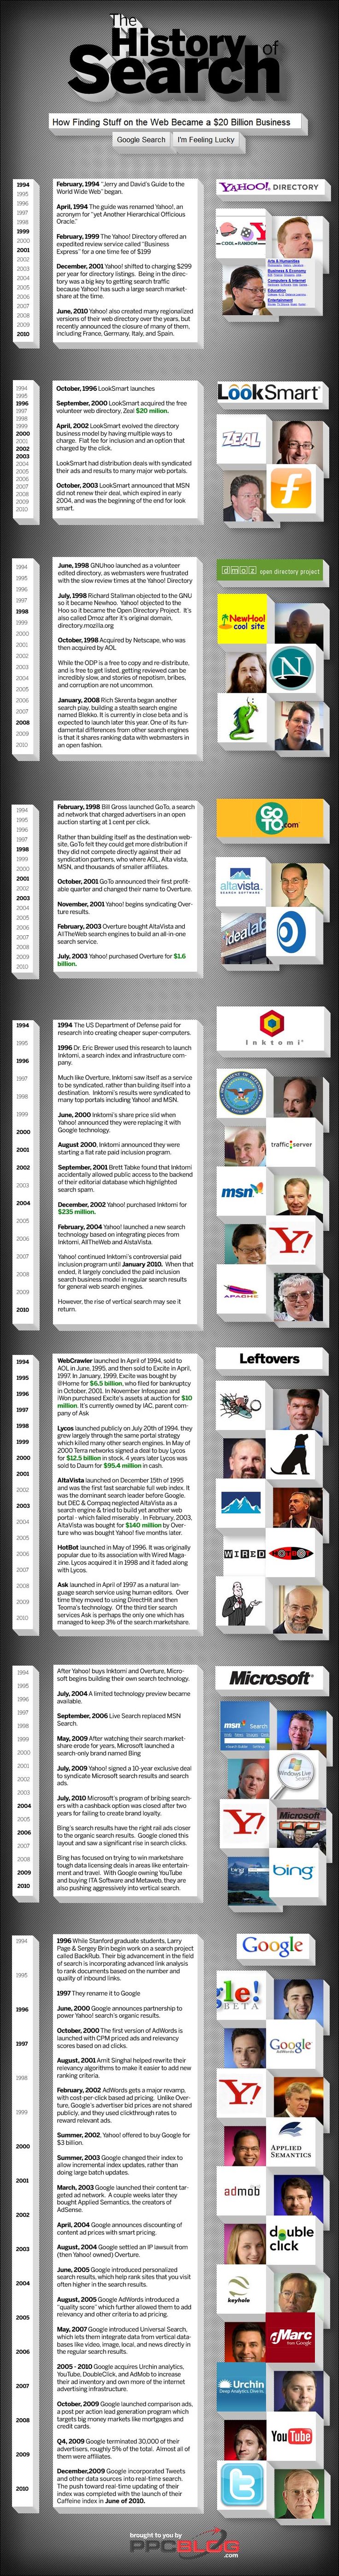 Advertising-Infographics-The-History-of-Search Advertising Infographics : The History of Search.